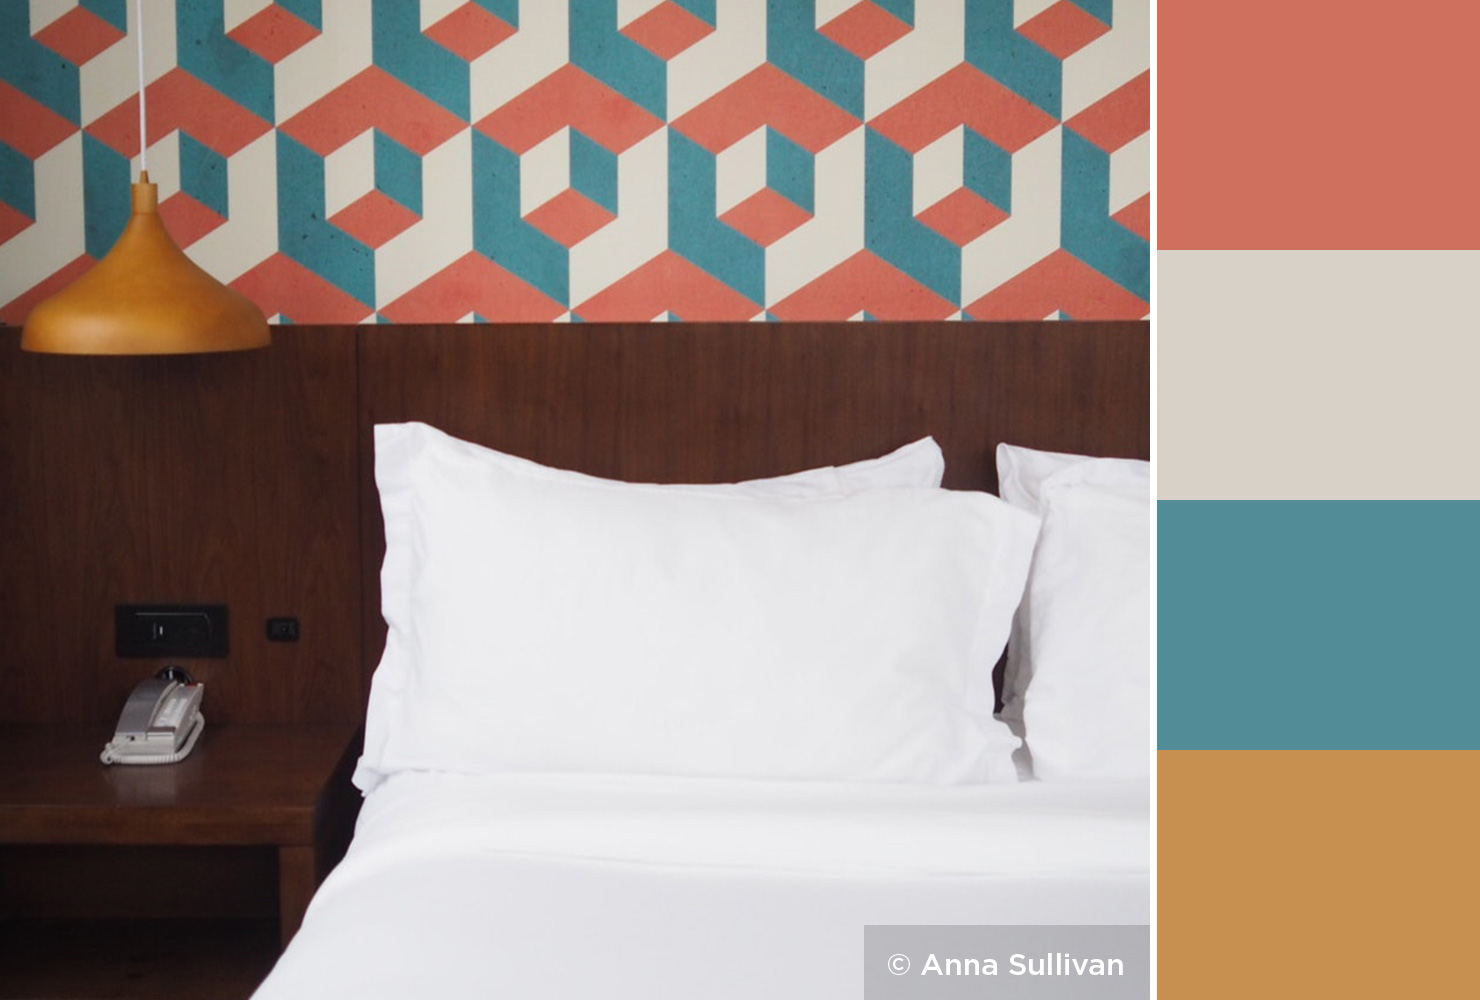 Teal And Coral - Three Colour Combination For Bedroom Walls - HD Wallpaper 